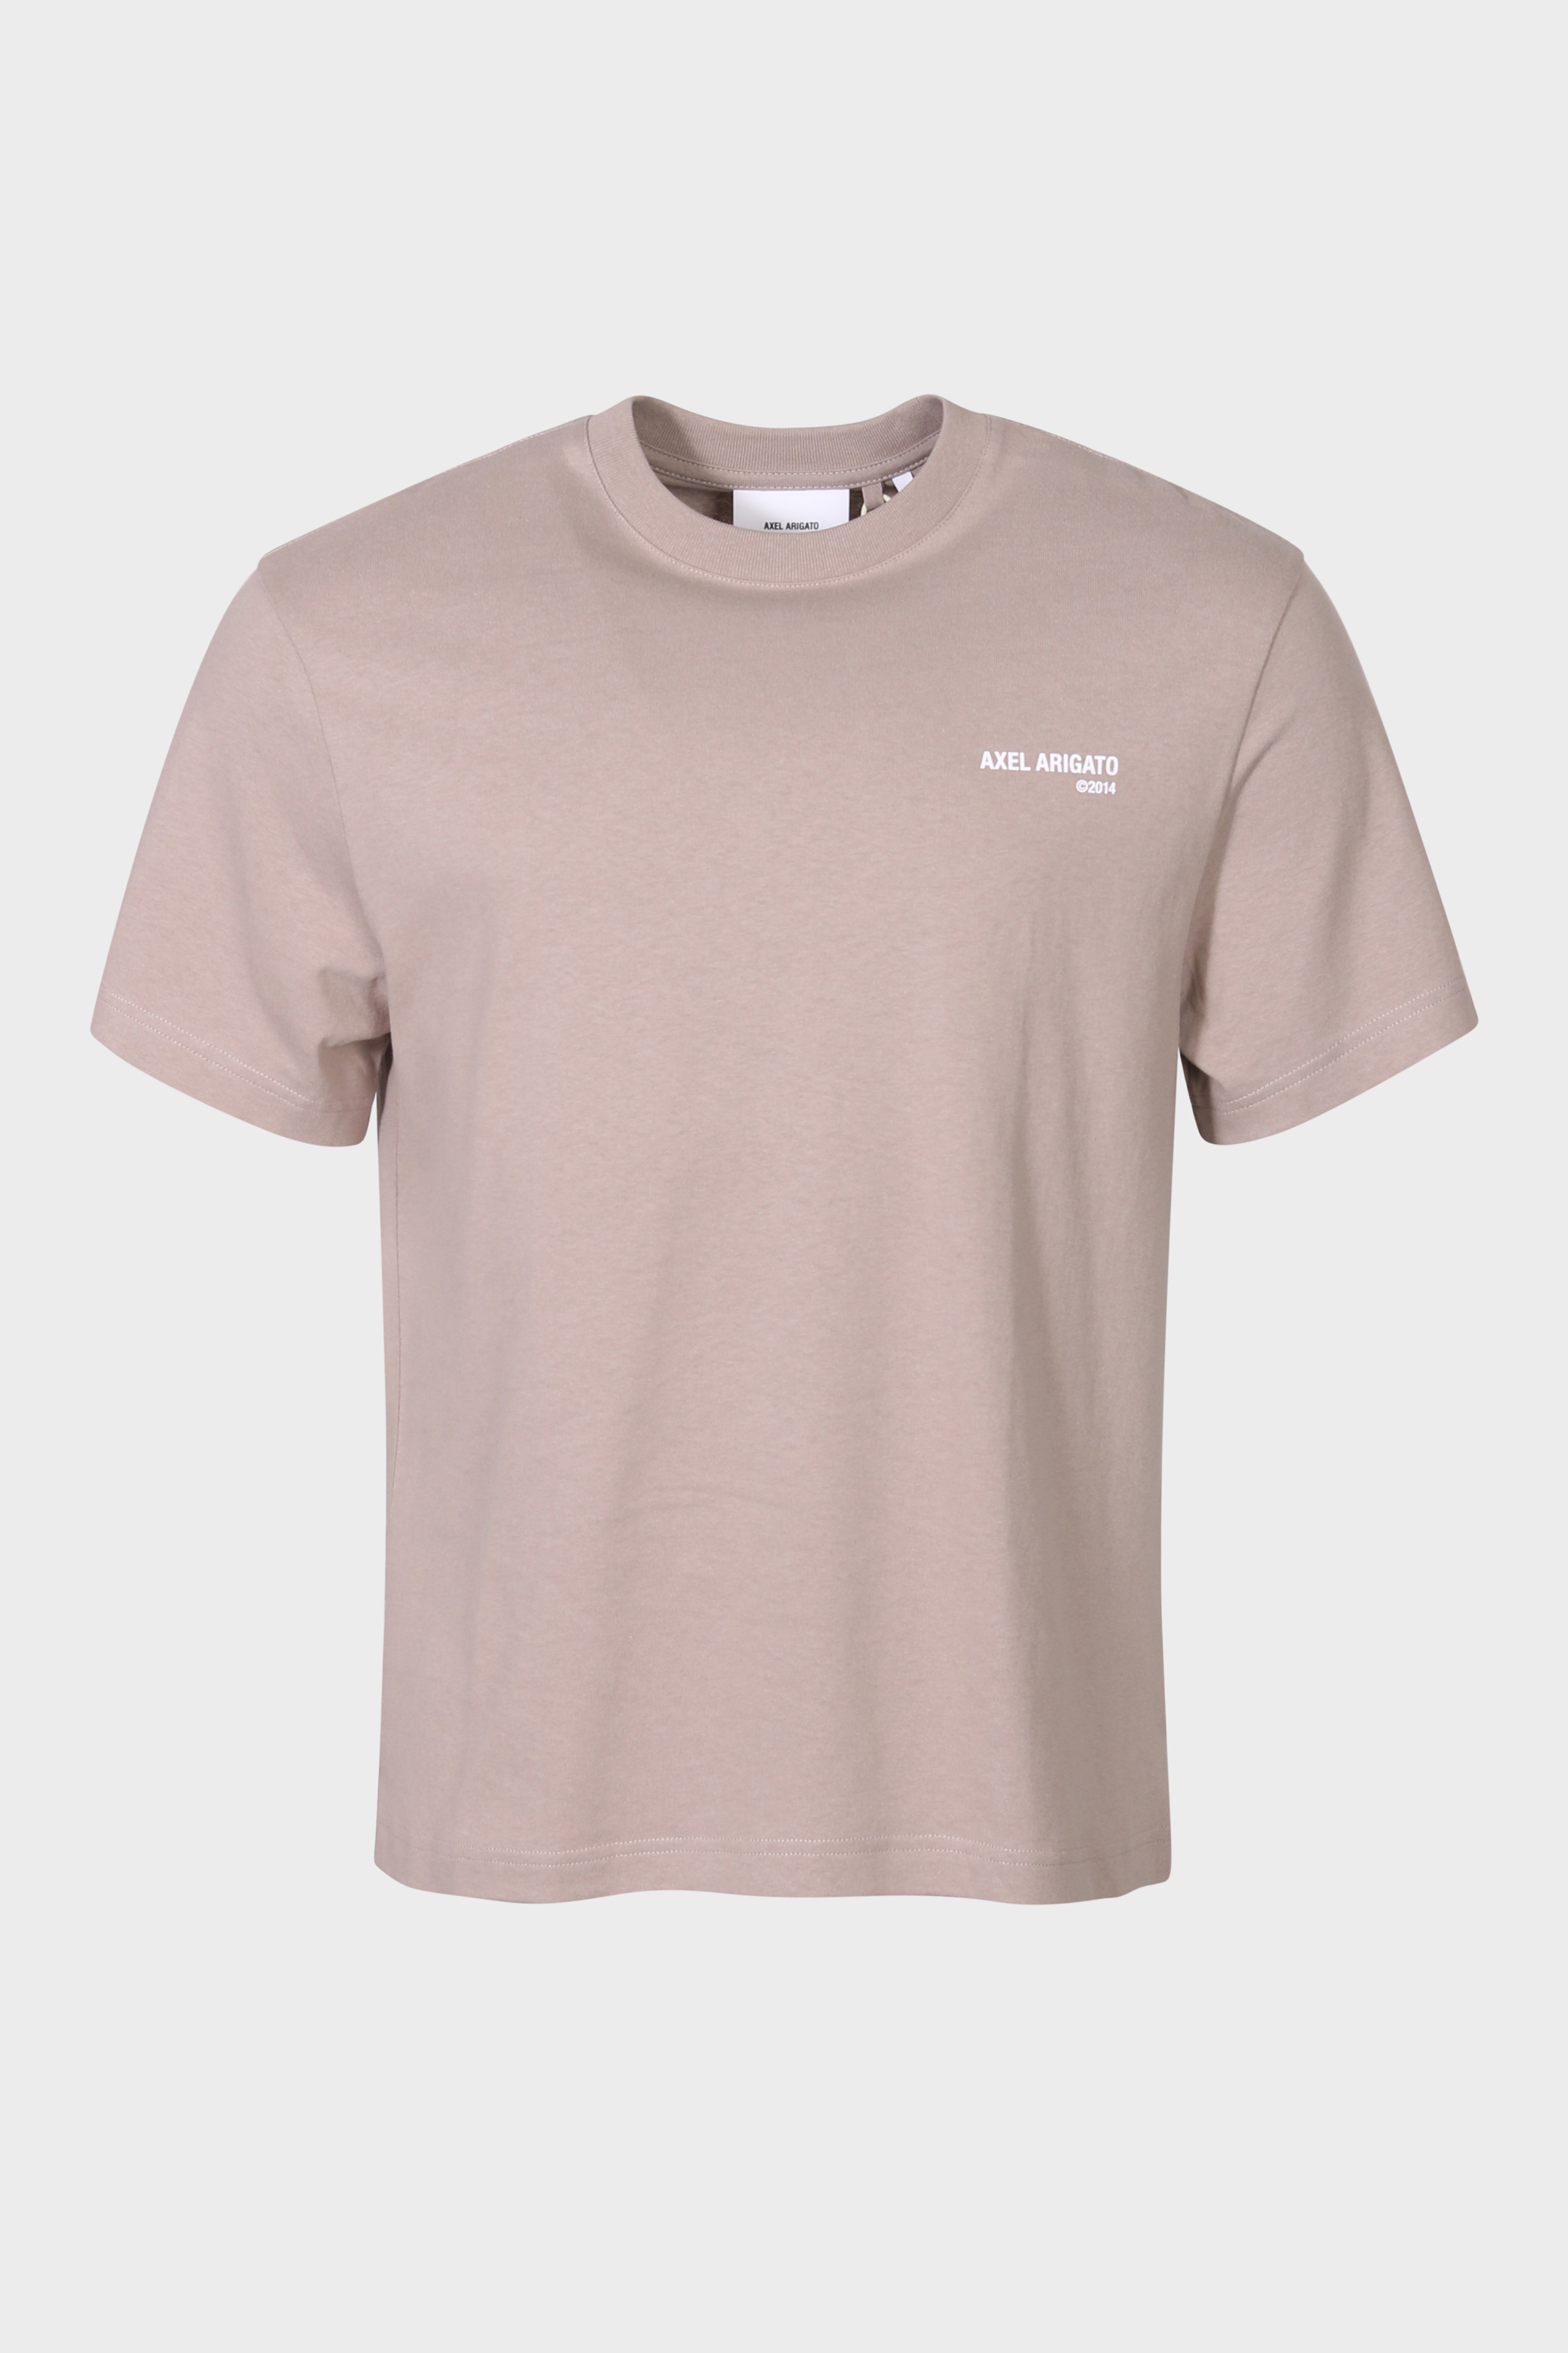 AXEL ARIGATO Legacy T-Shirt in Taupe L